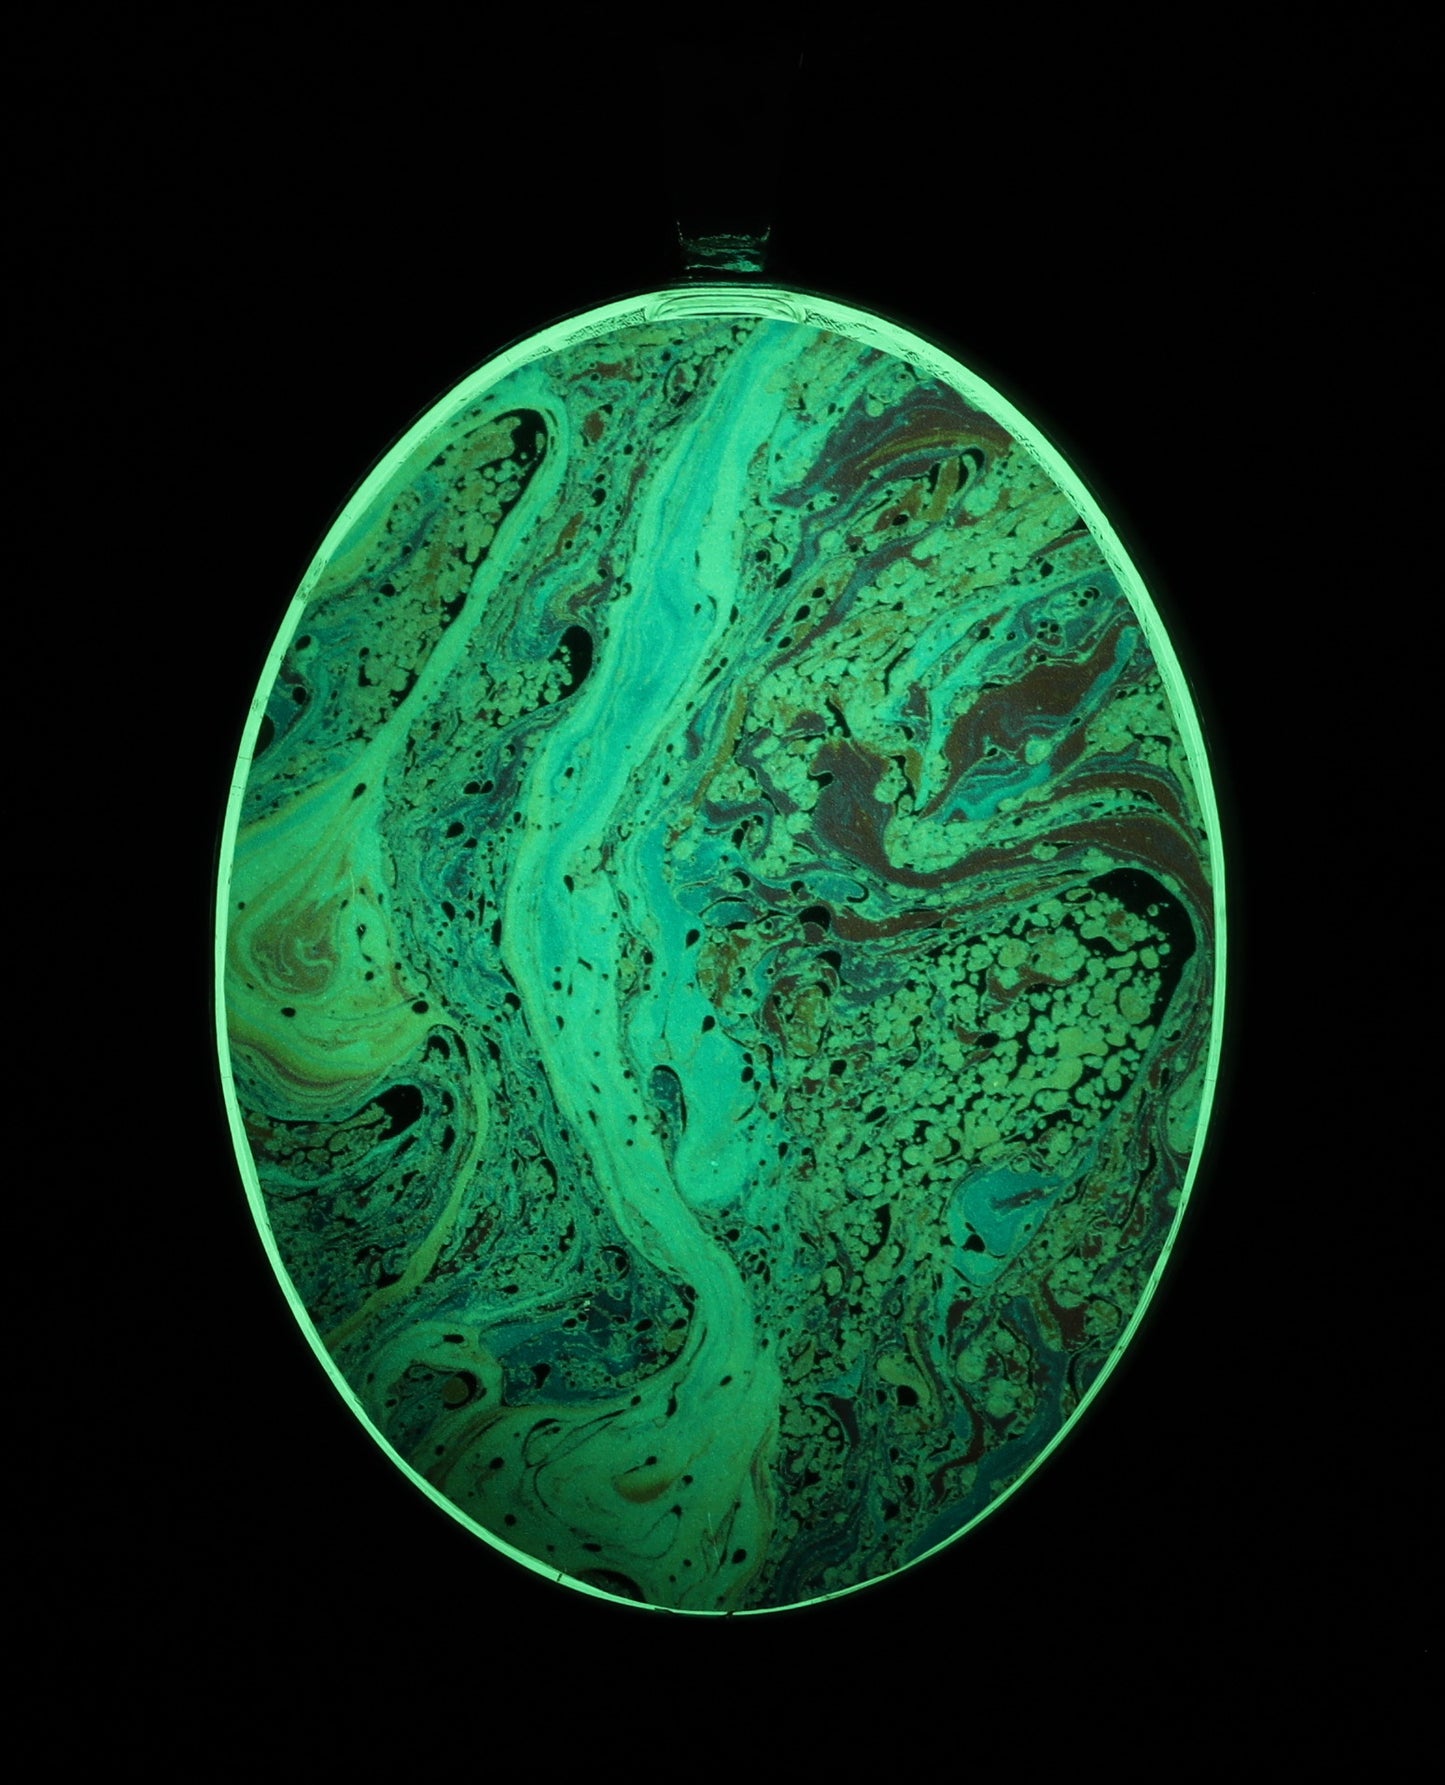 River Running  - Glow-in-the-dark pendant with a beautiful abstract soap film pattern